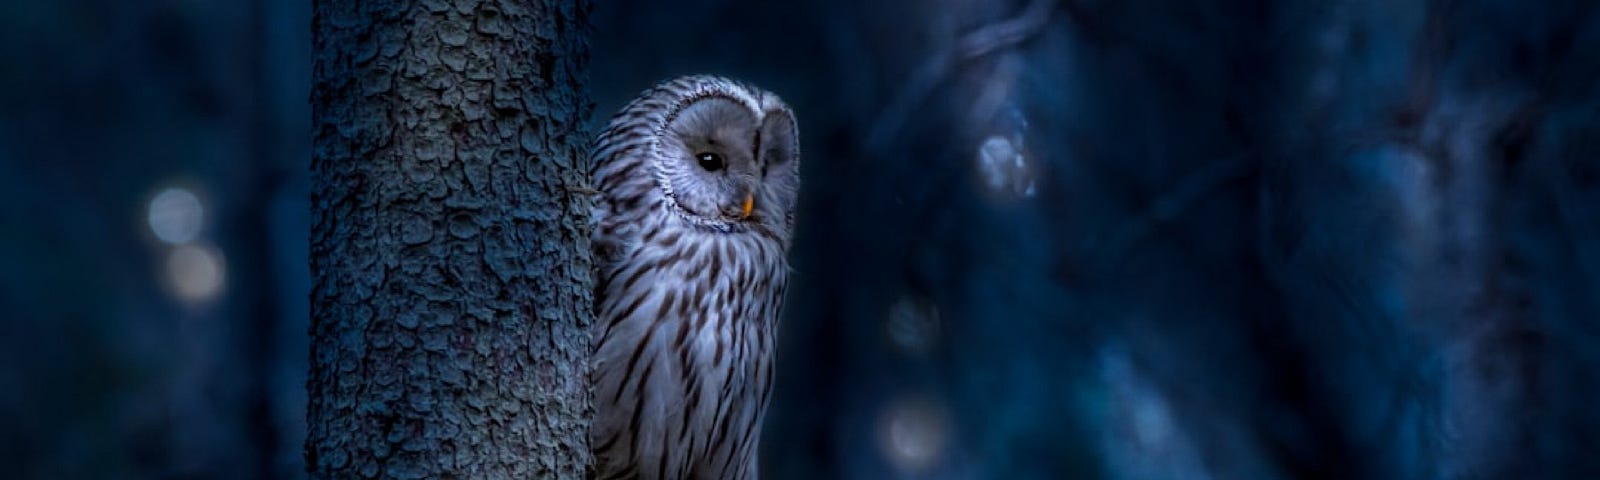 an owl peaking between tree branches at night